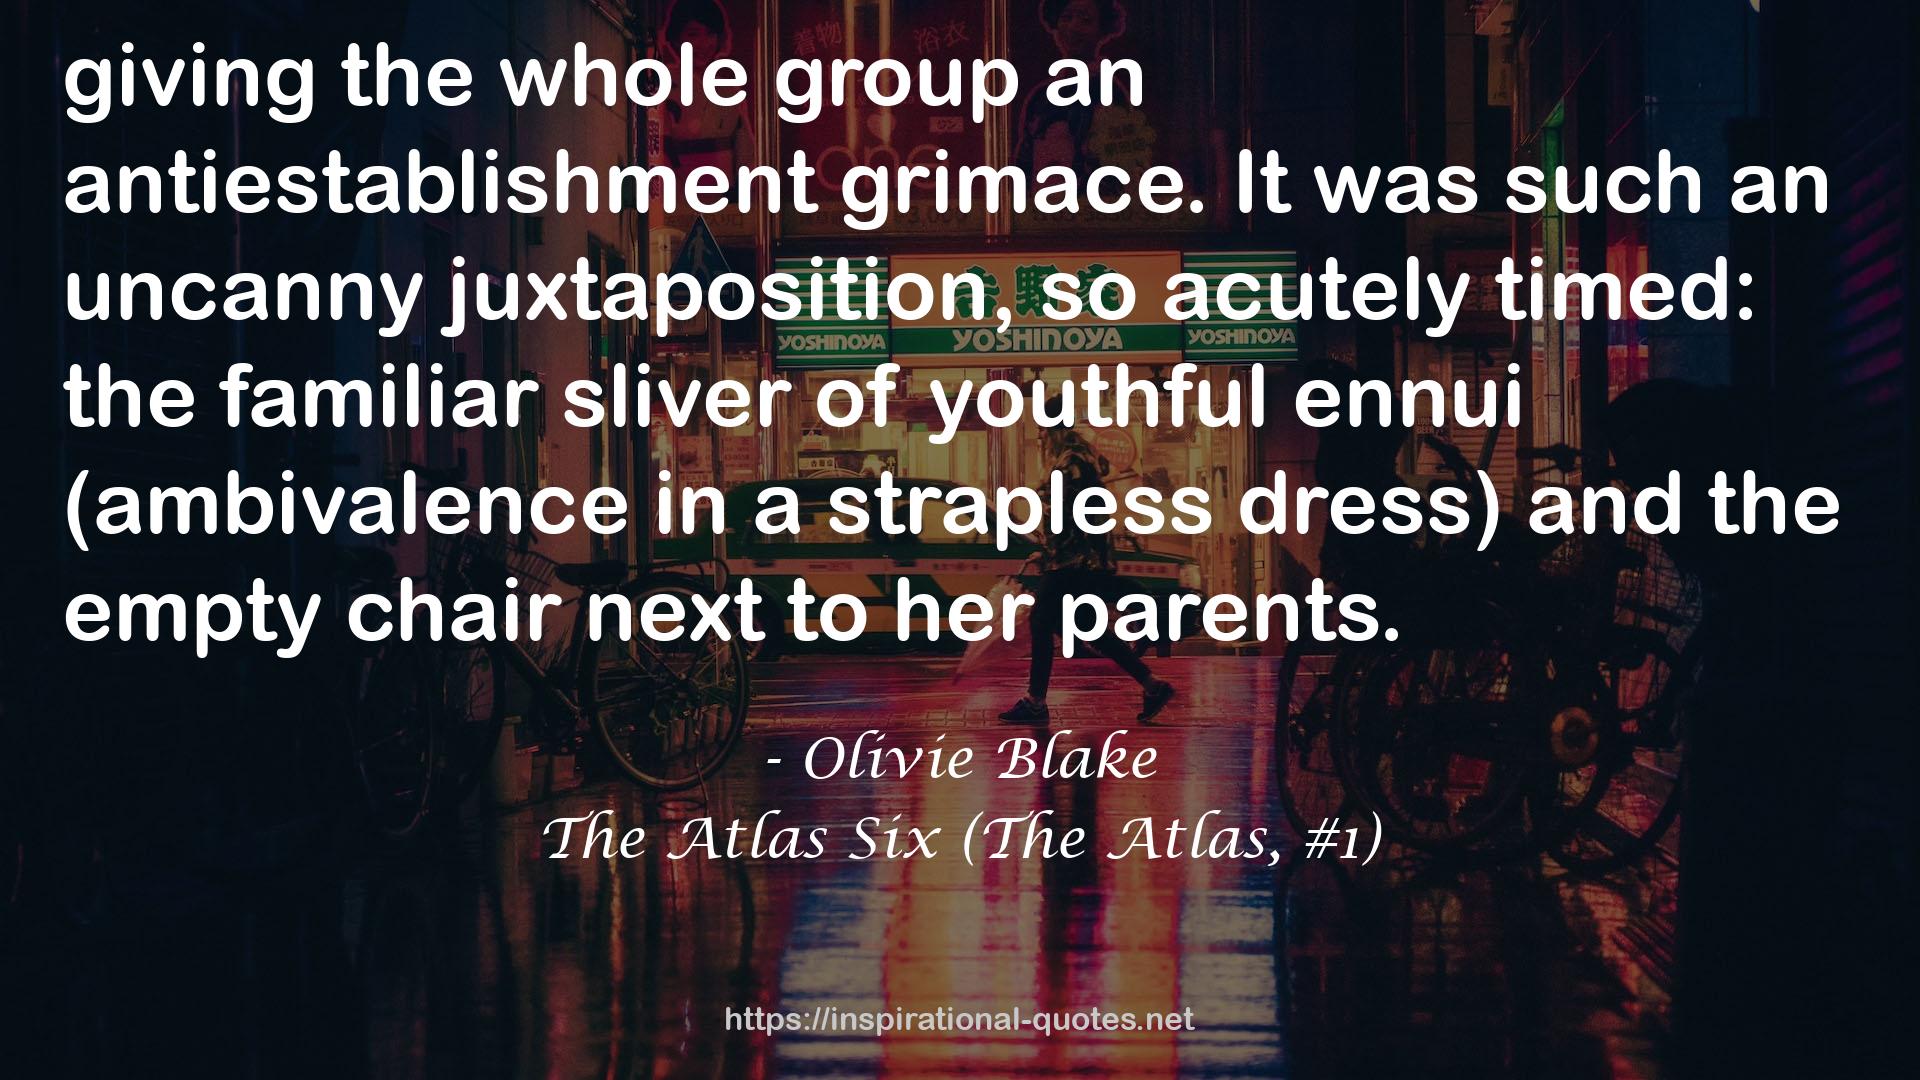 The Atlas Six (The Atlas, #1) QUOTES